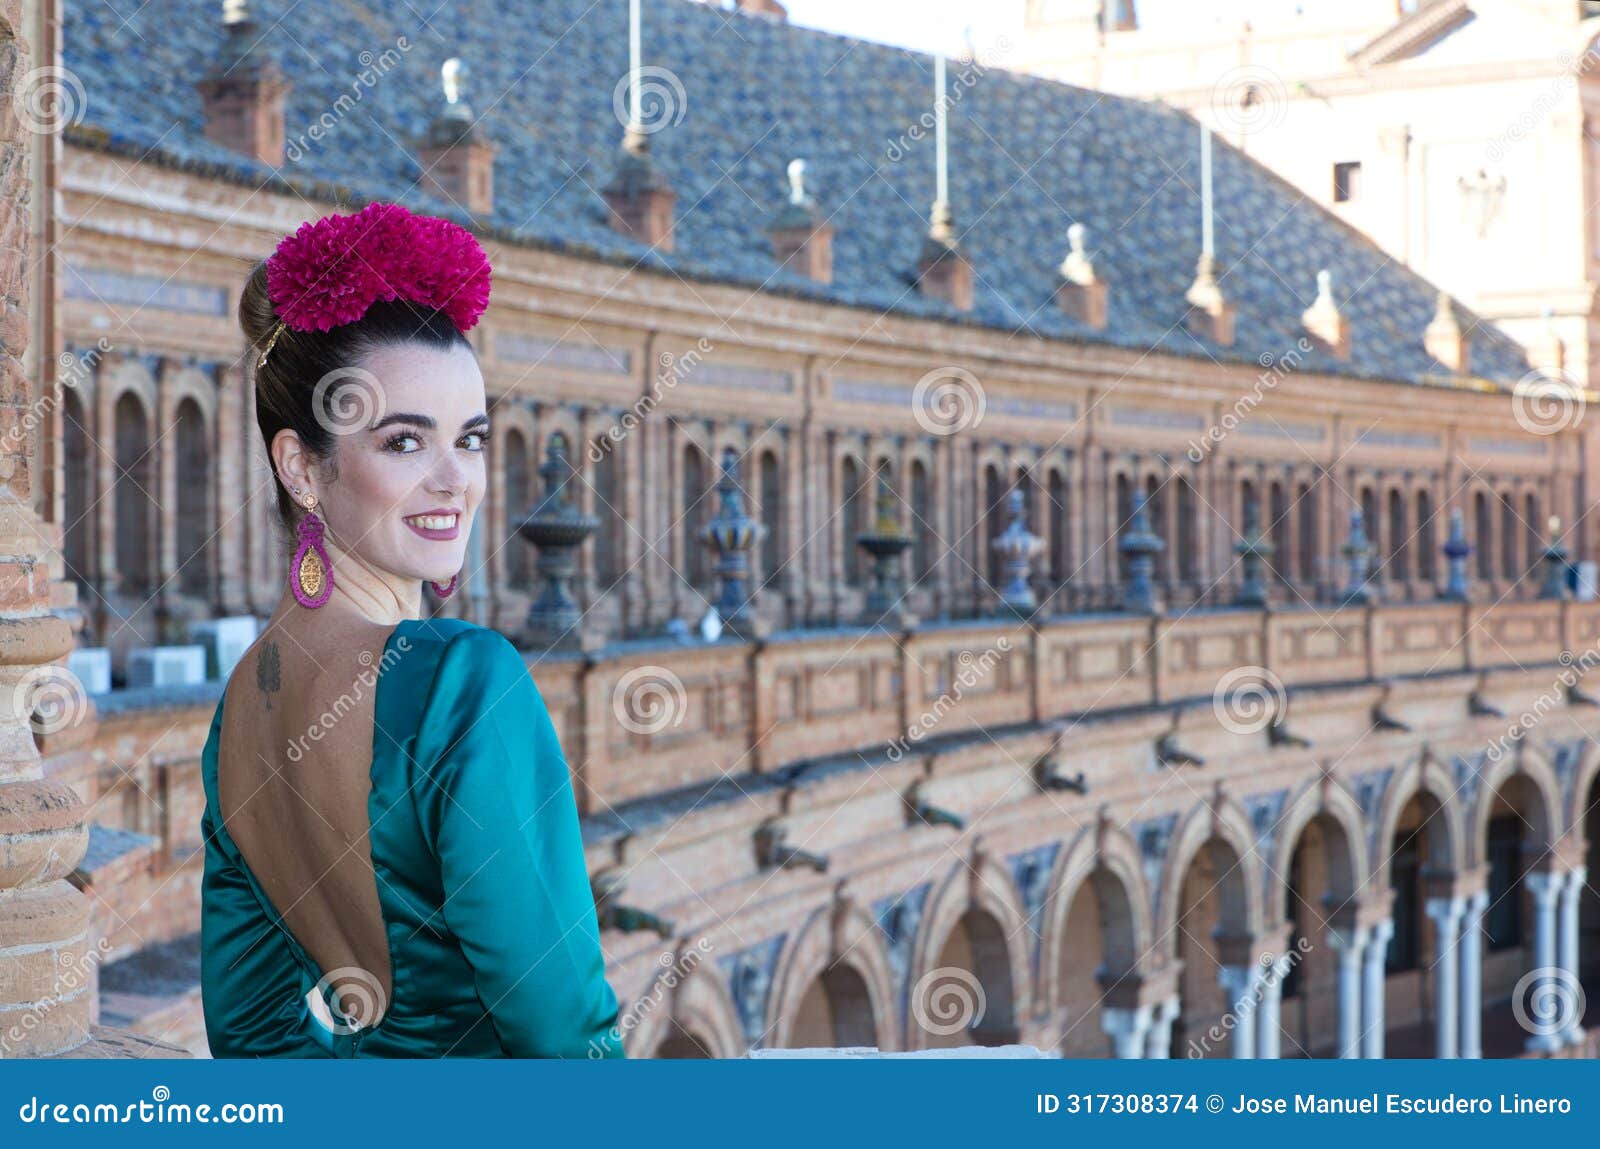 beautiful young woman with typical green frilly dress and dancing flamenco in plaza de espana in sevilla, andalusia, she is on a